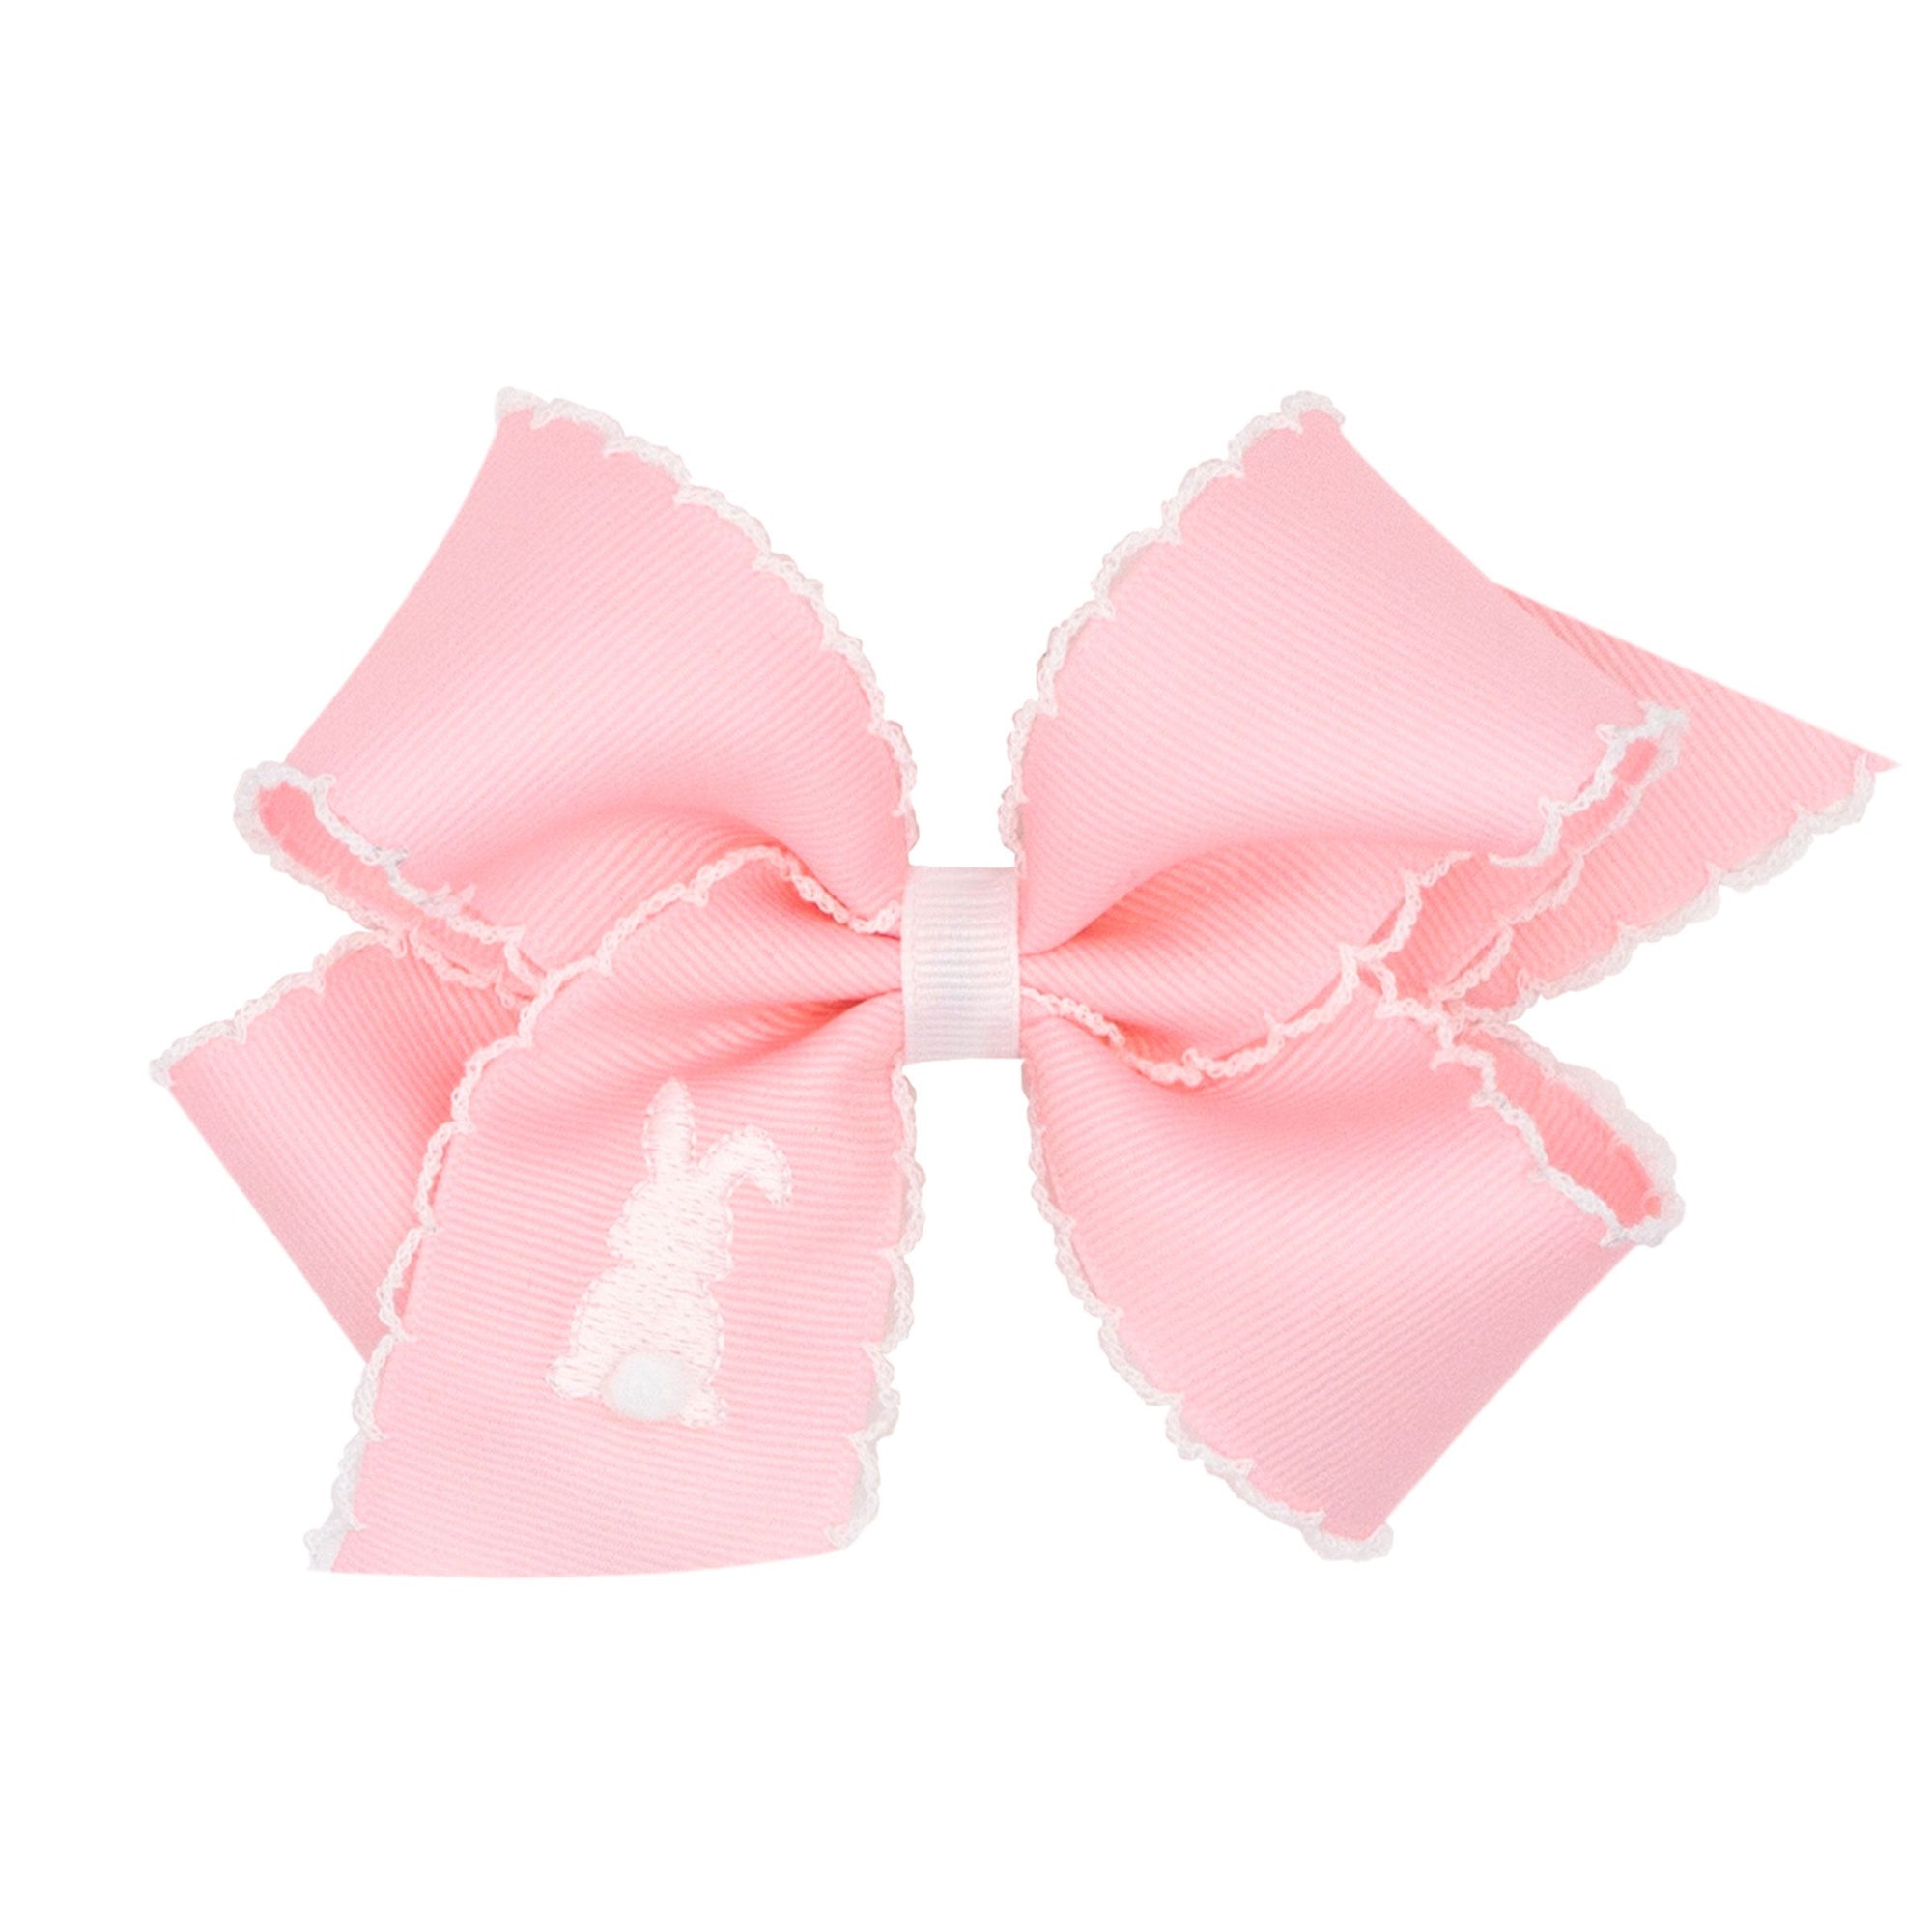 Medium Grosgrain Hair Bow with Moonstitch Edge and Easter Embroidery | White Bunny